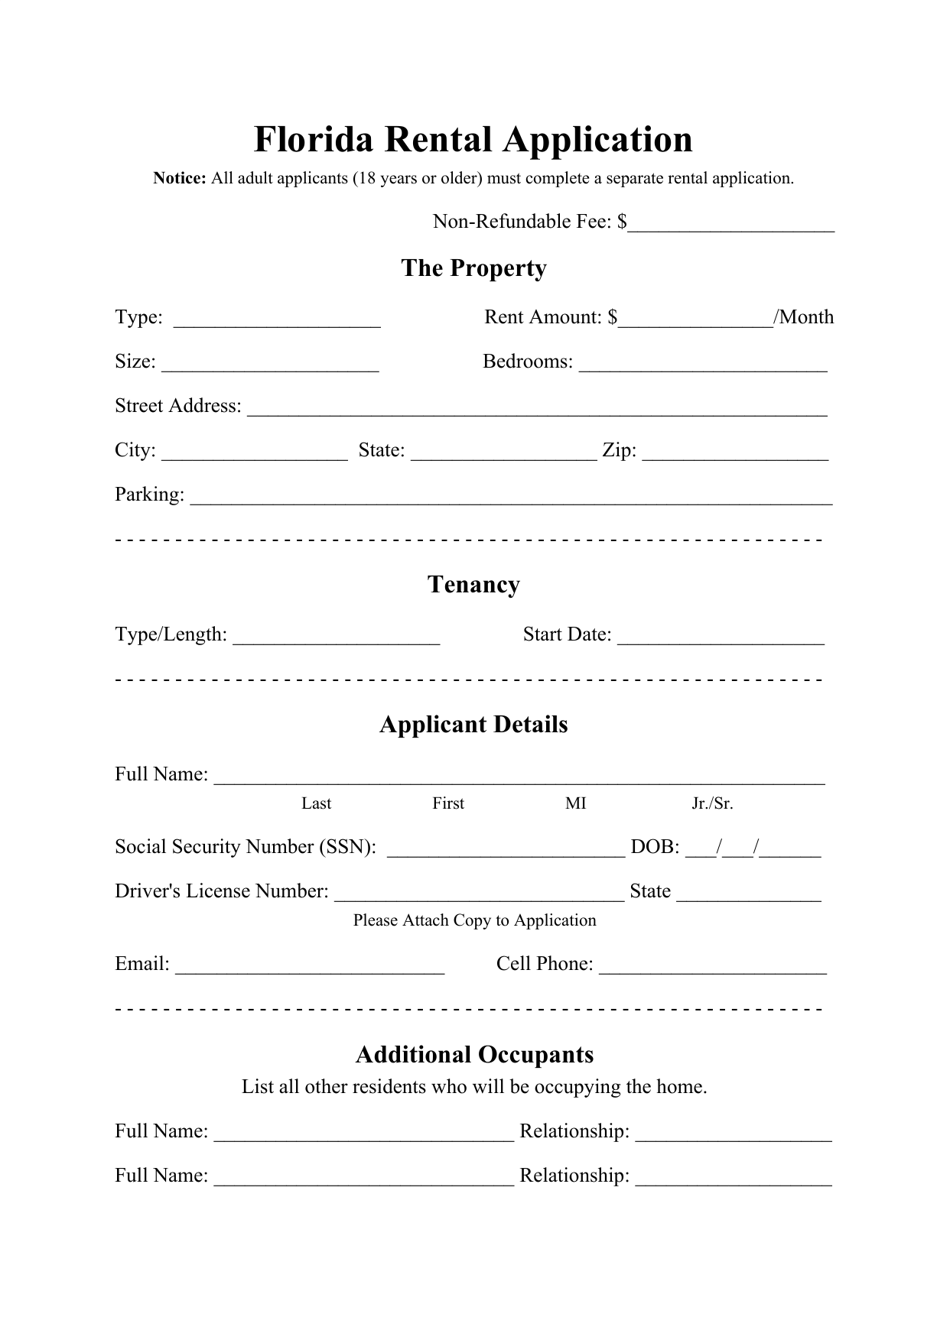 florida-rental-application-form-fill-out-sign-online-and-download